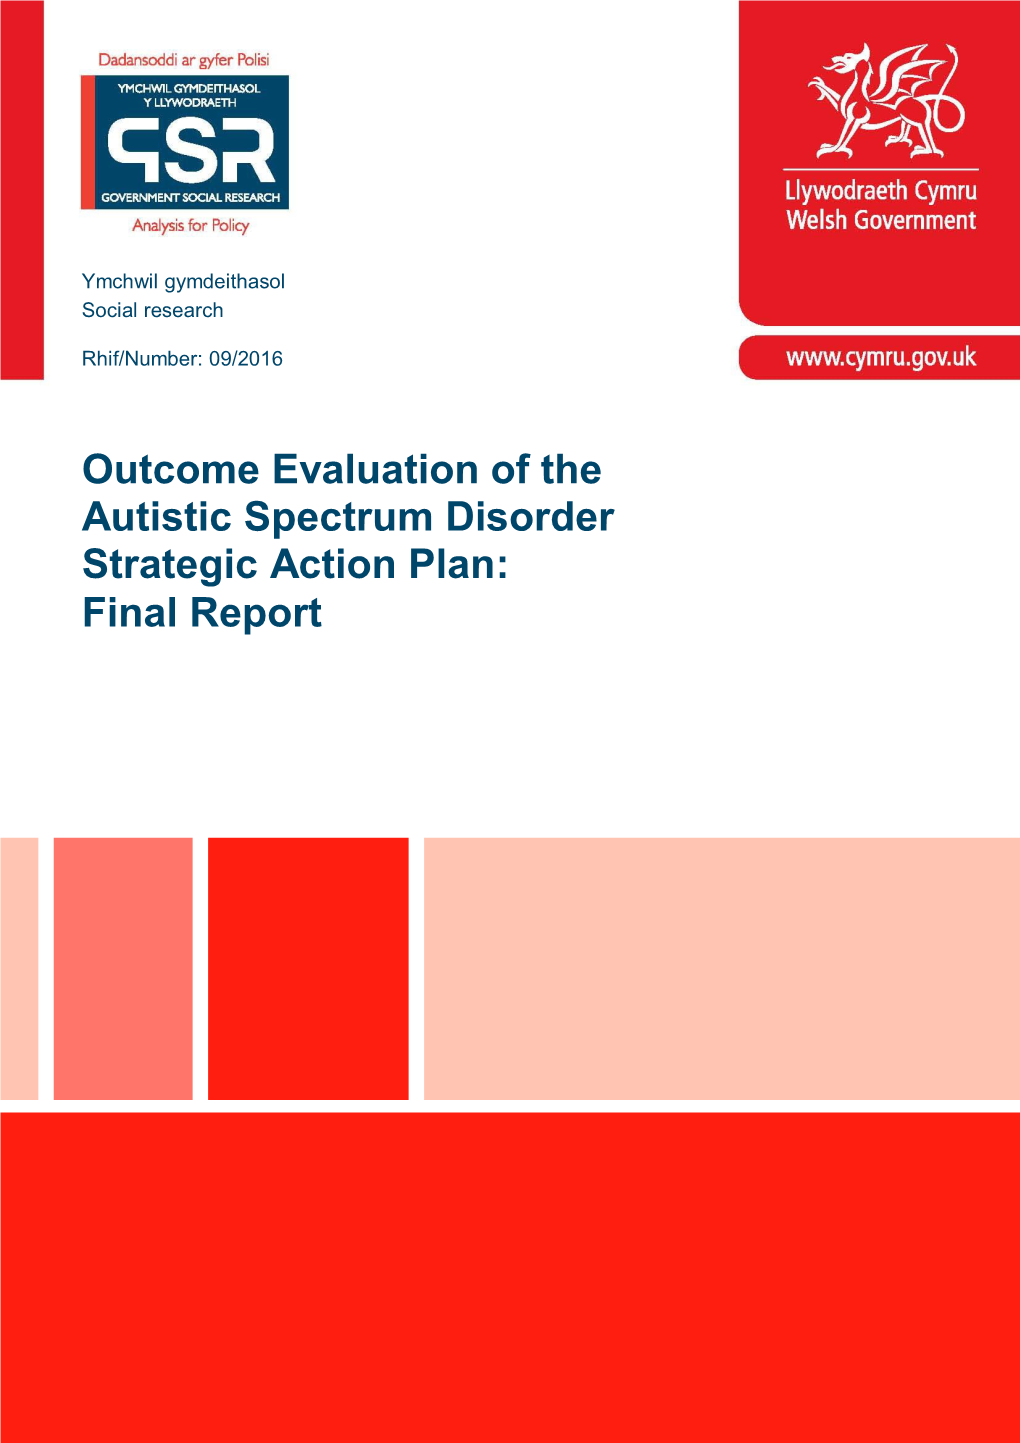 Outcome Evaluation of the Autistic Spectrum Disorder Strategic Action Plan